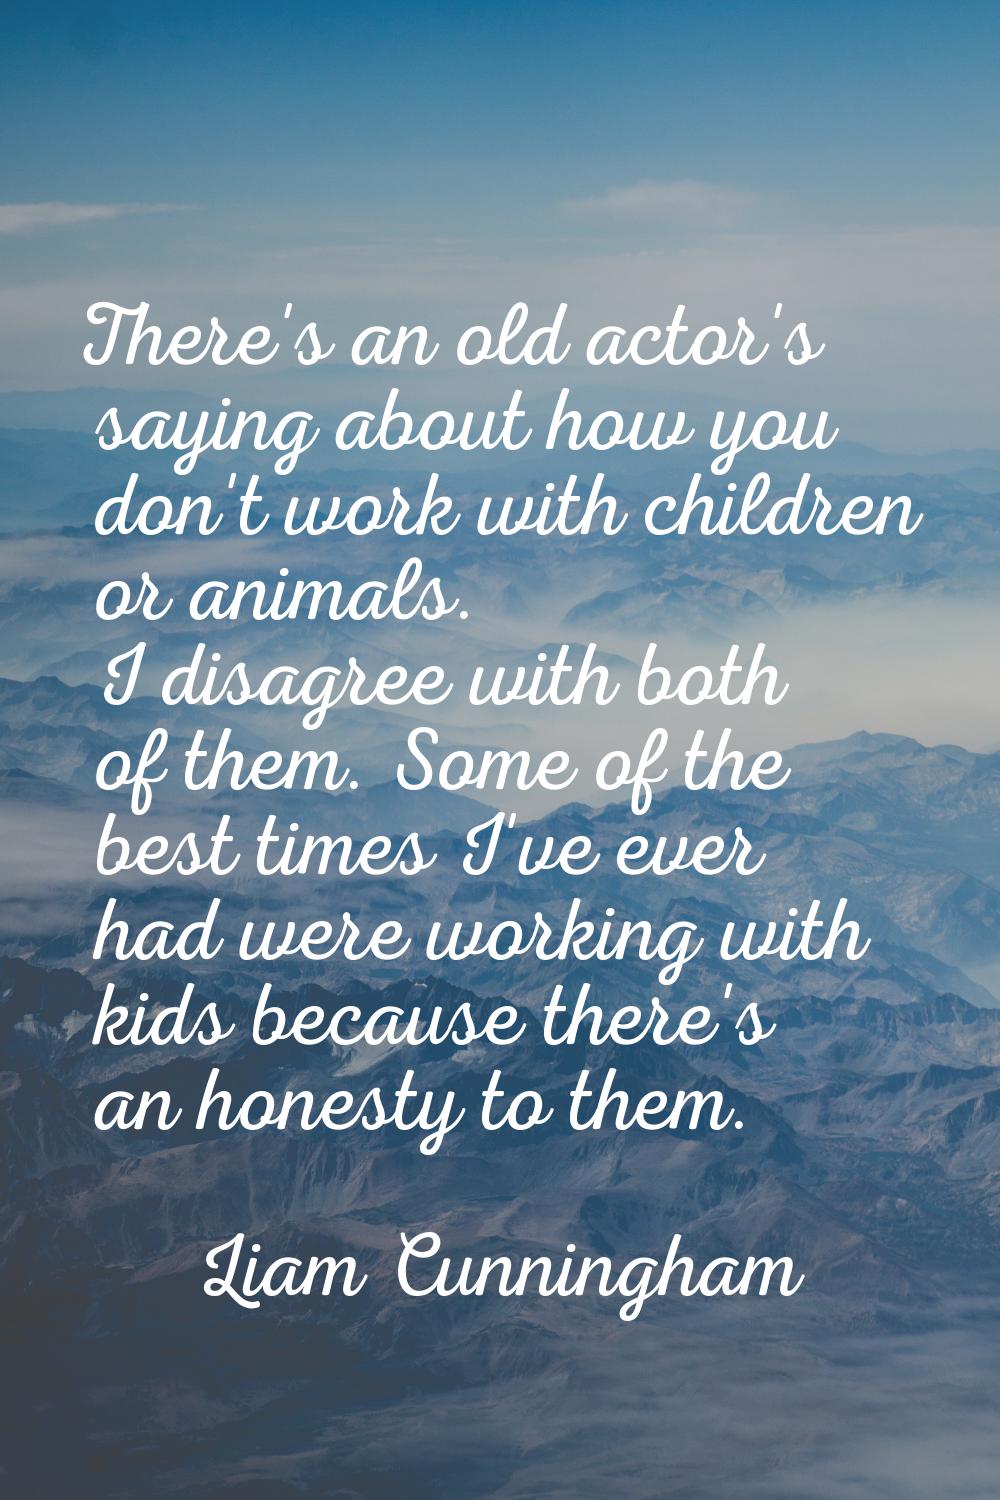 There's an old actor's saying about how you don't work with children or animals. I disagree with bo